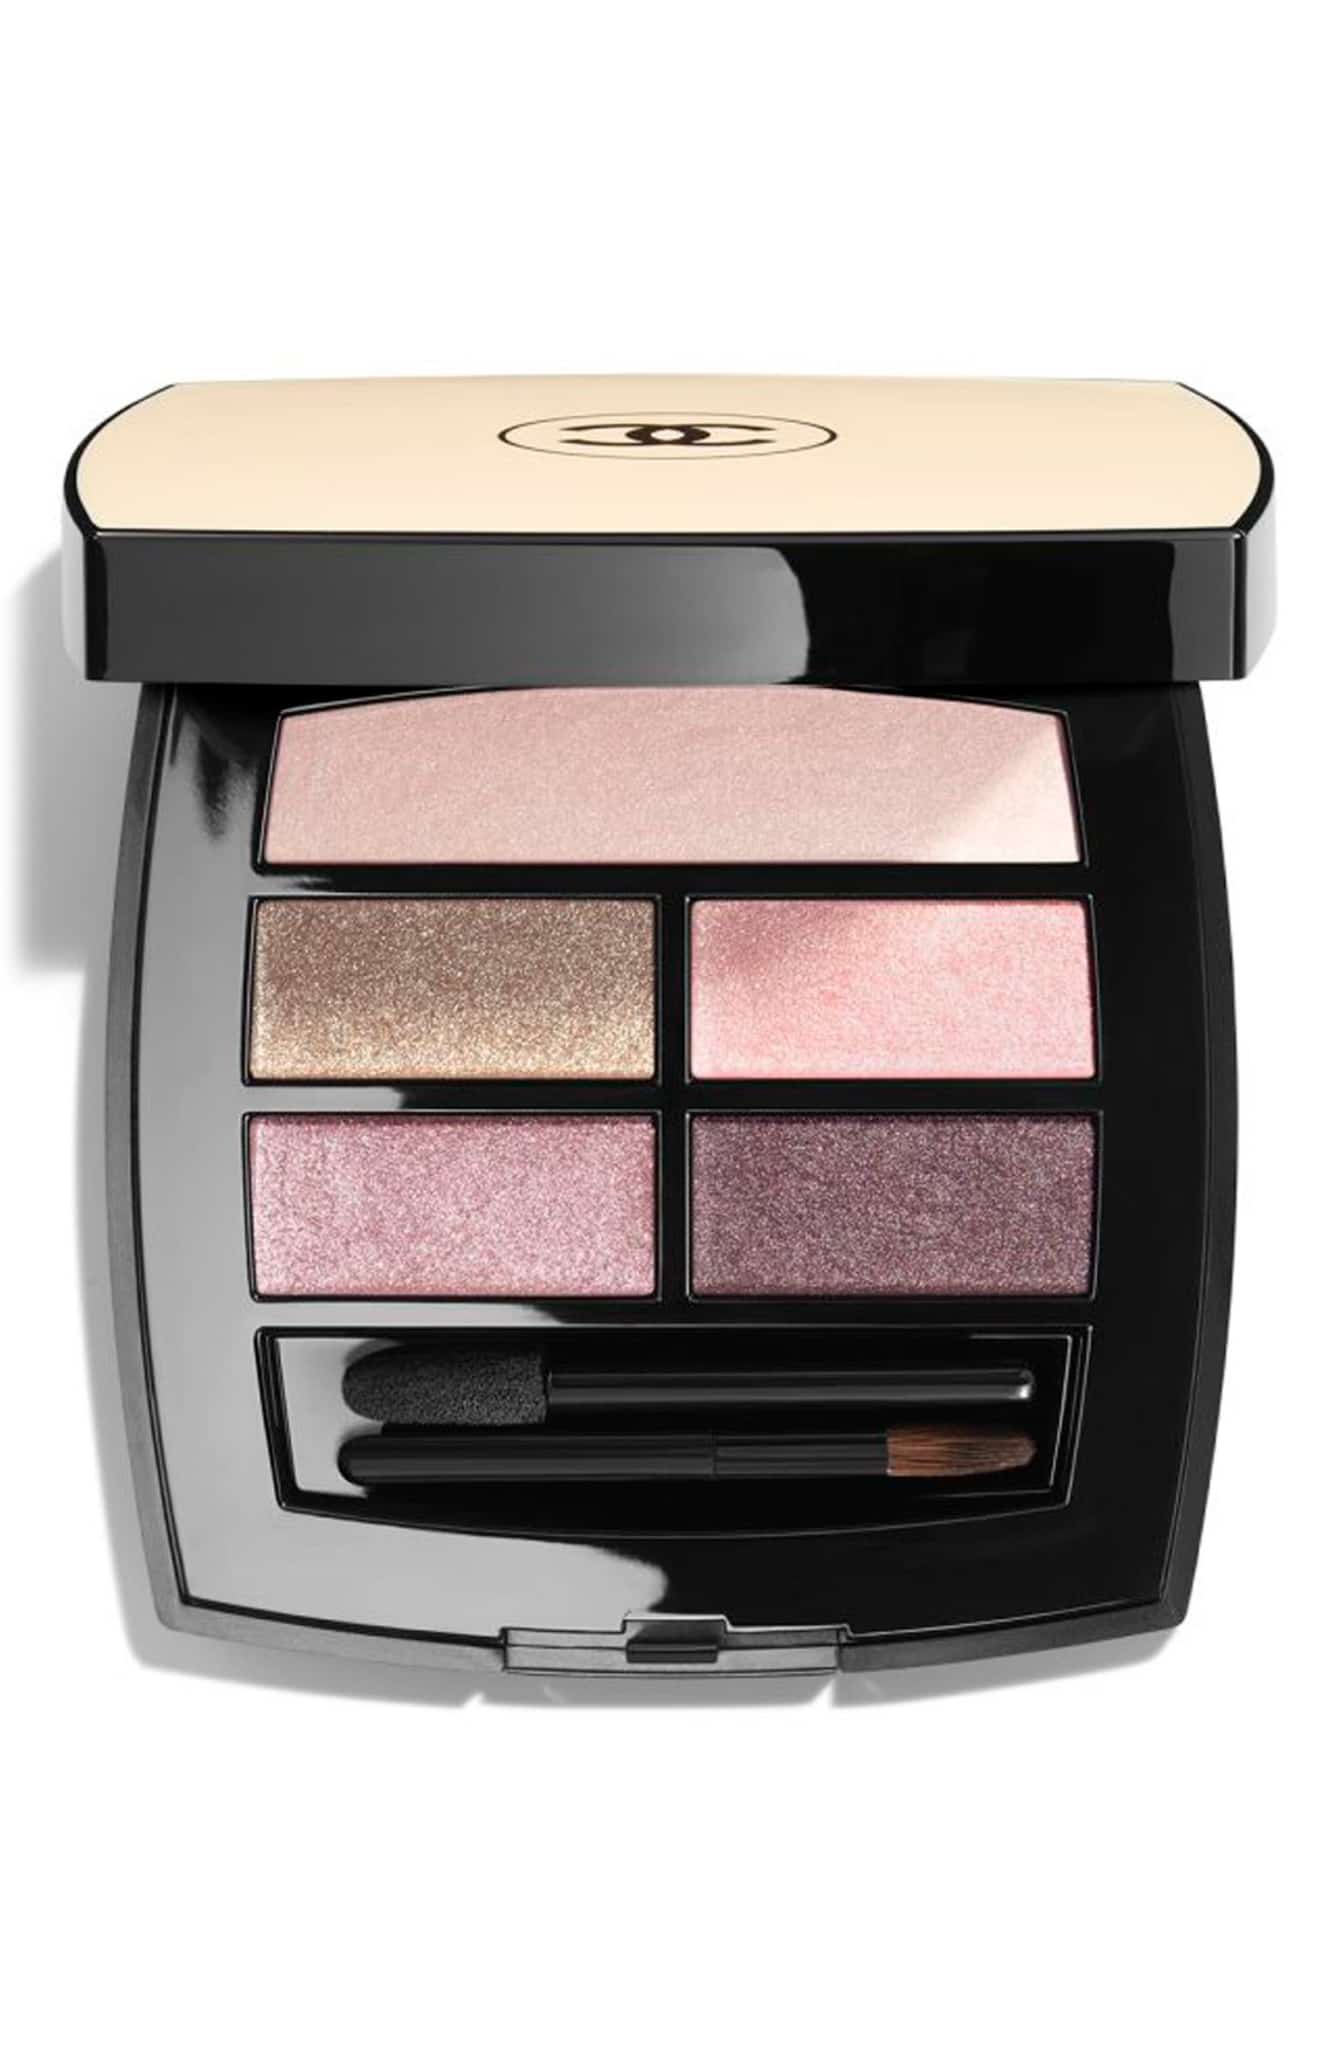 Notable Bestselling Chanel products - eyeshadow palette - beauty products